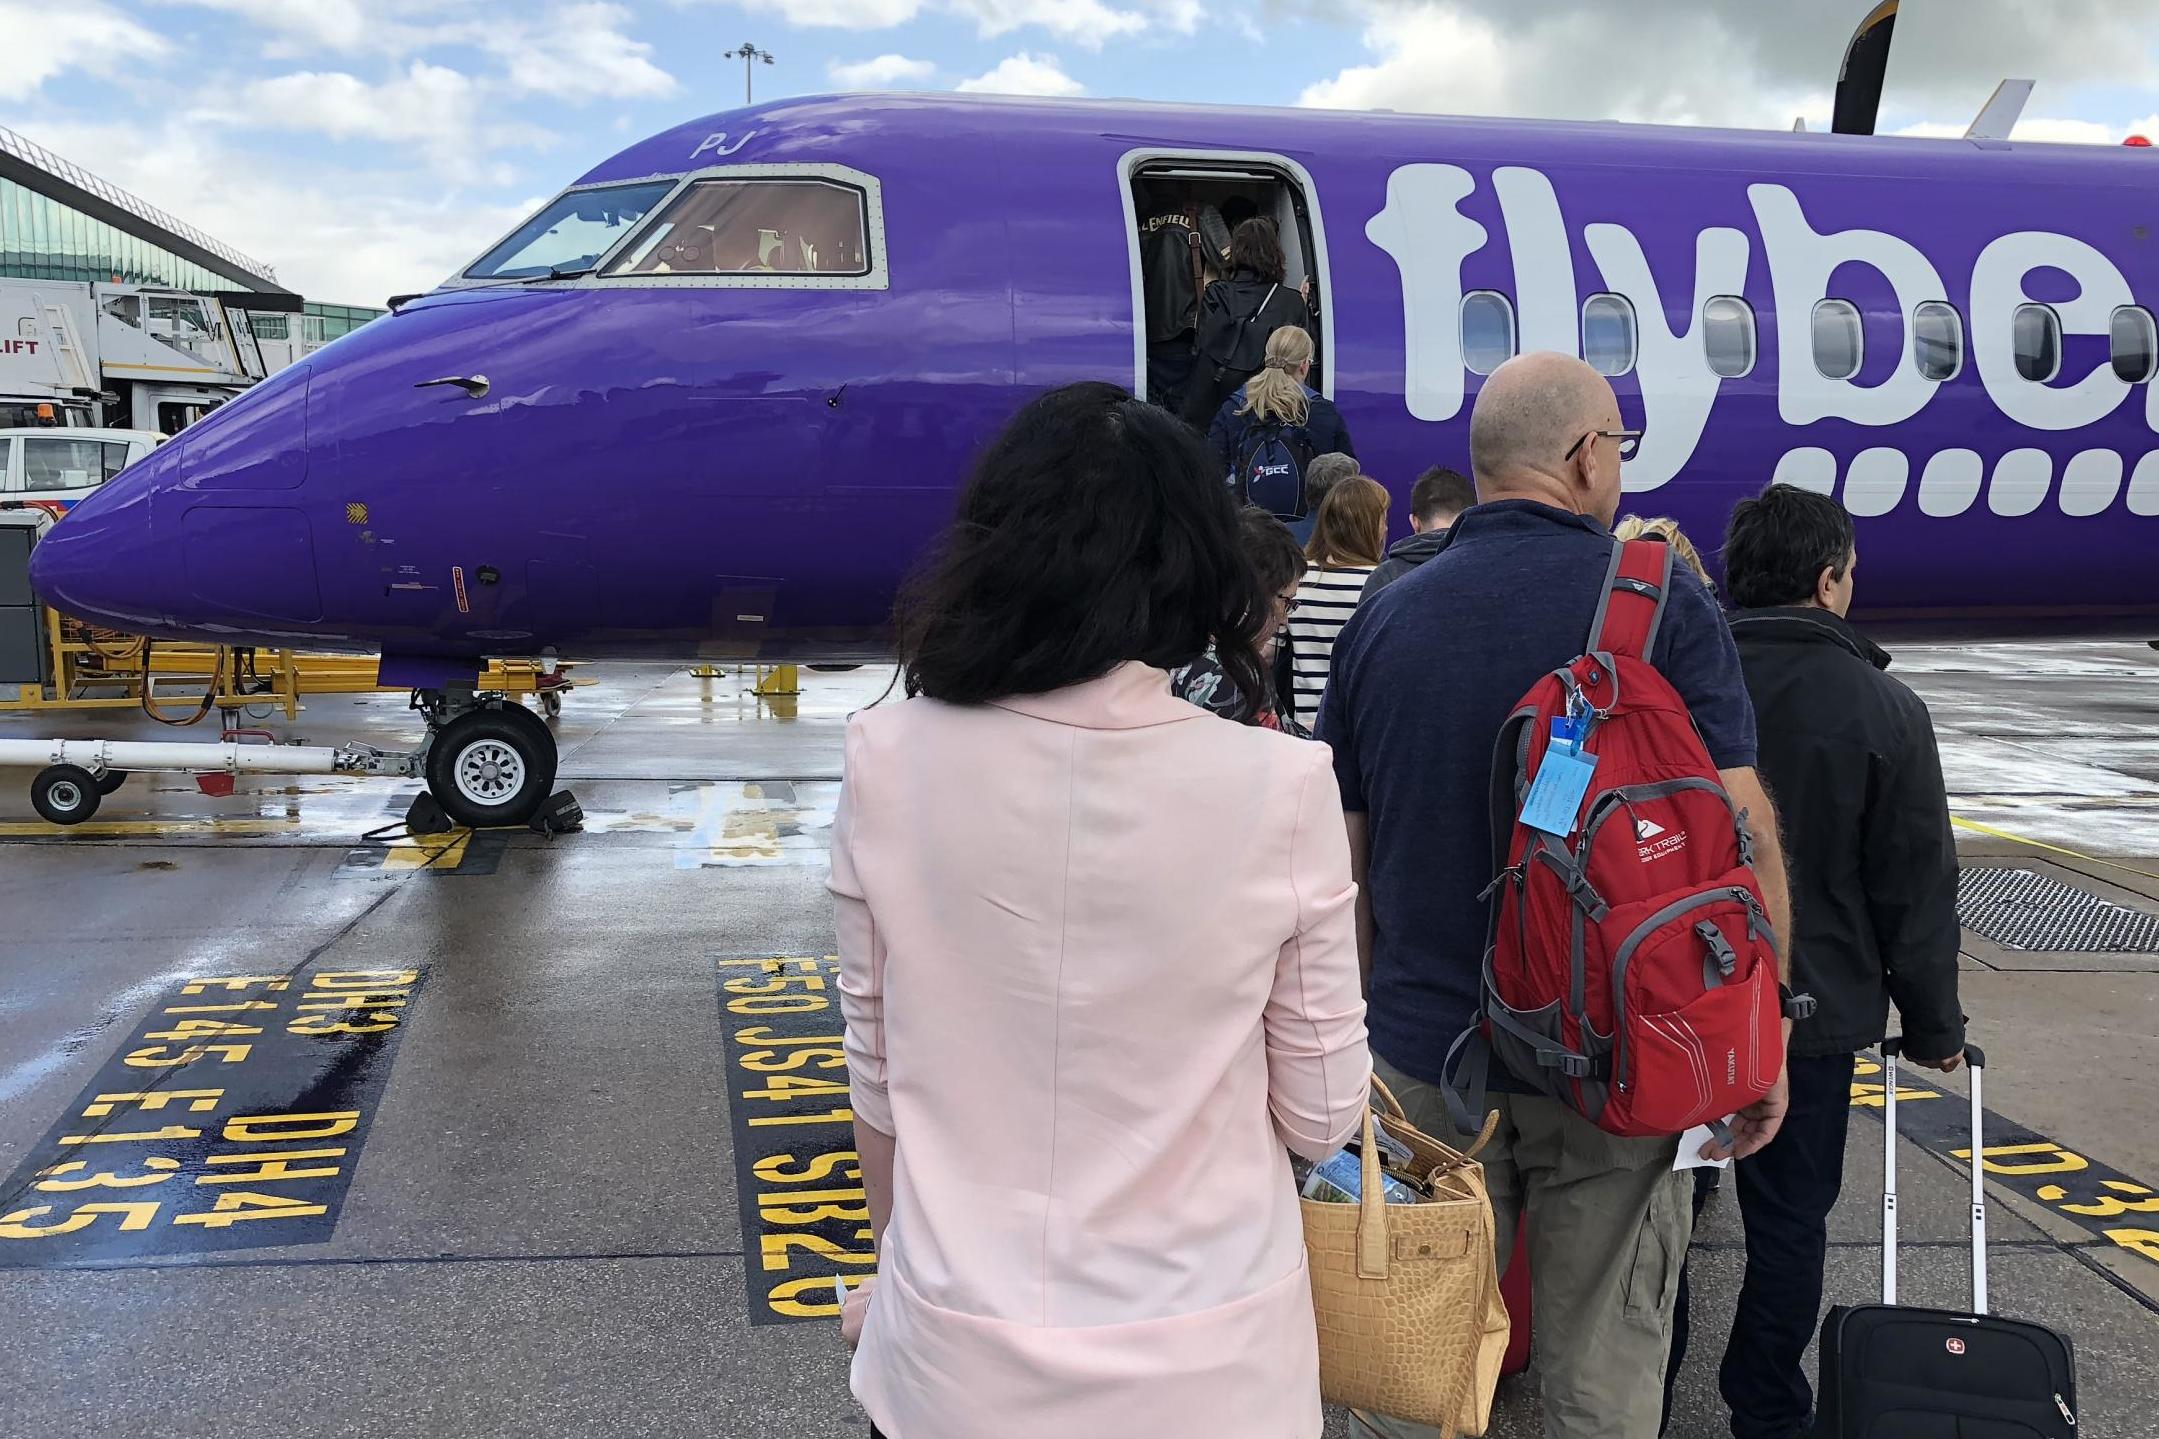 Flybe's new stance is upsetting passengers